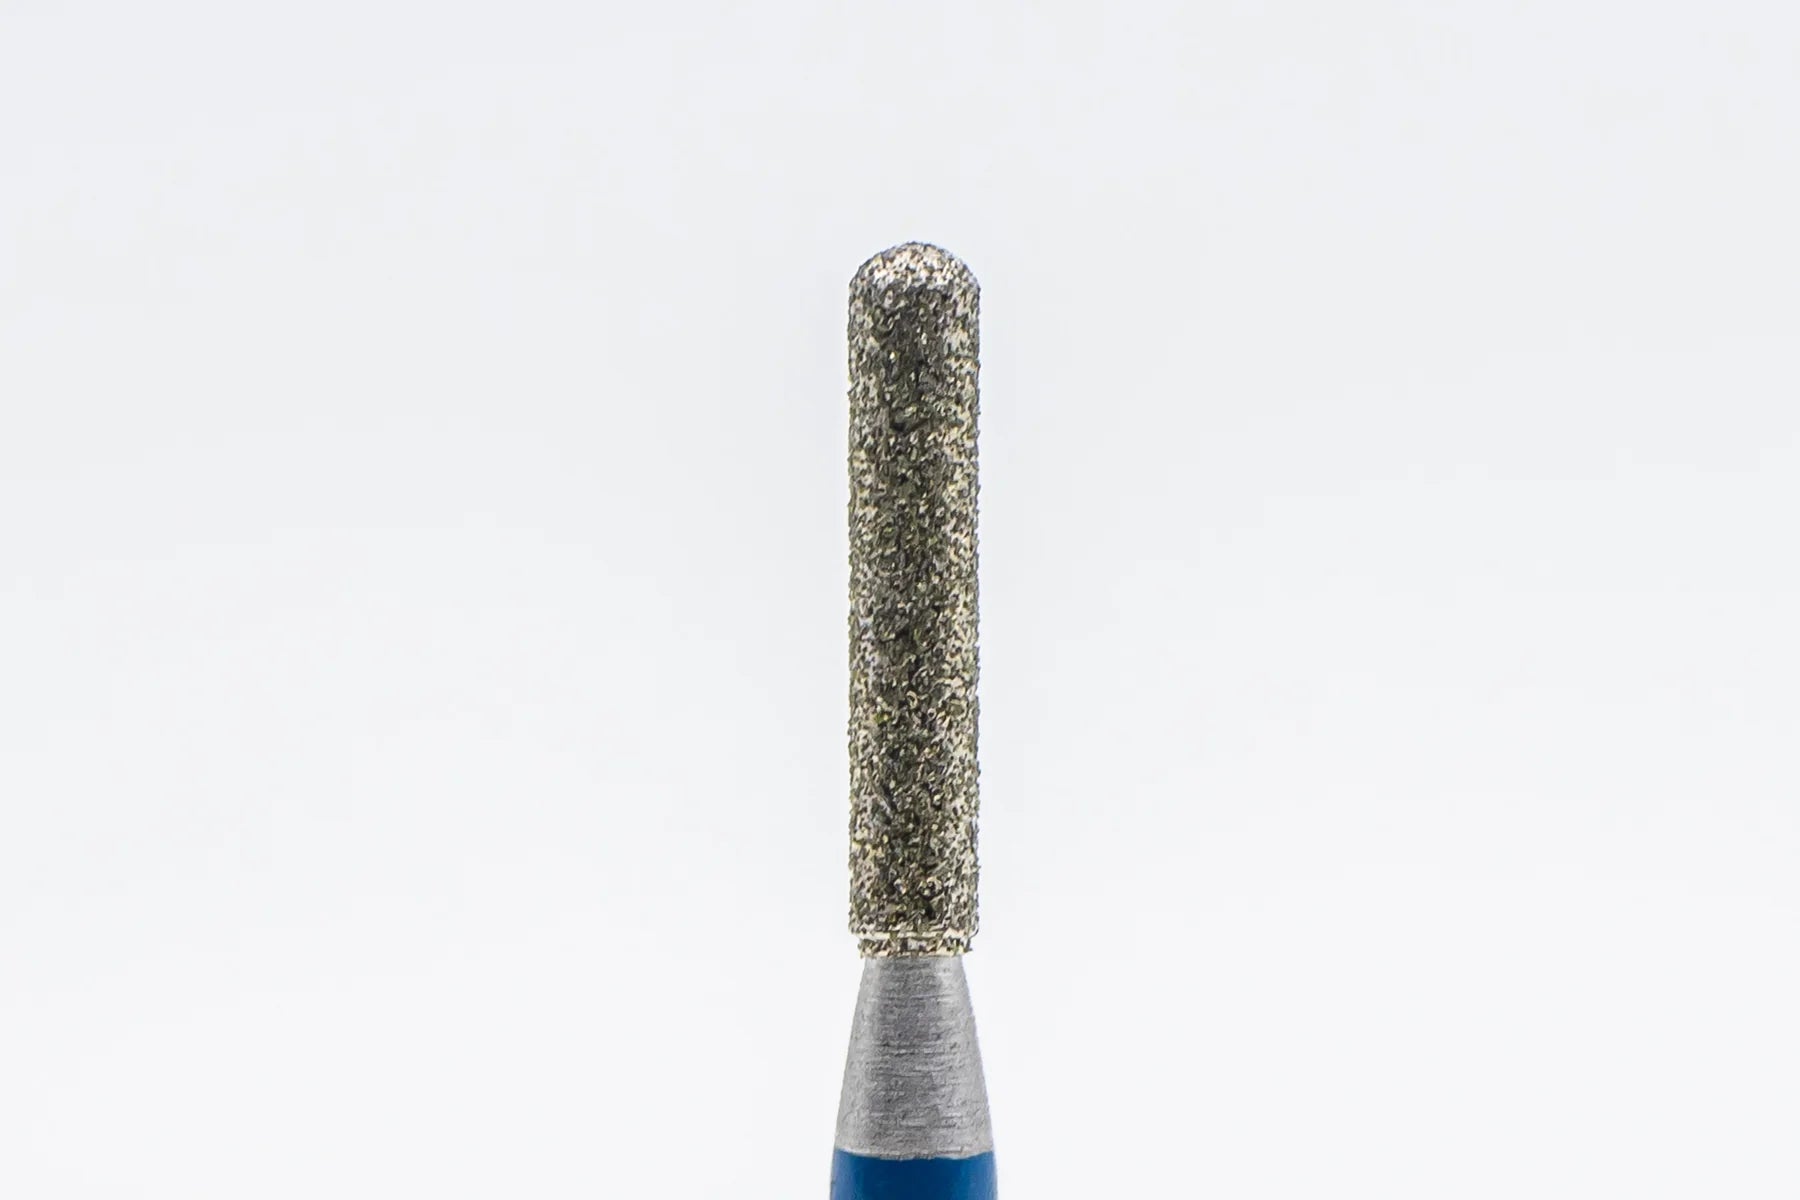 Diamond Nail Drill Bits D-68/1, shape rounded cylinder, head size 2.3x10.0 mm.